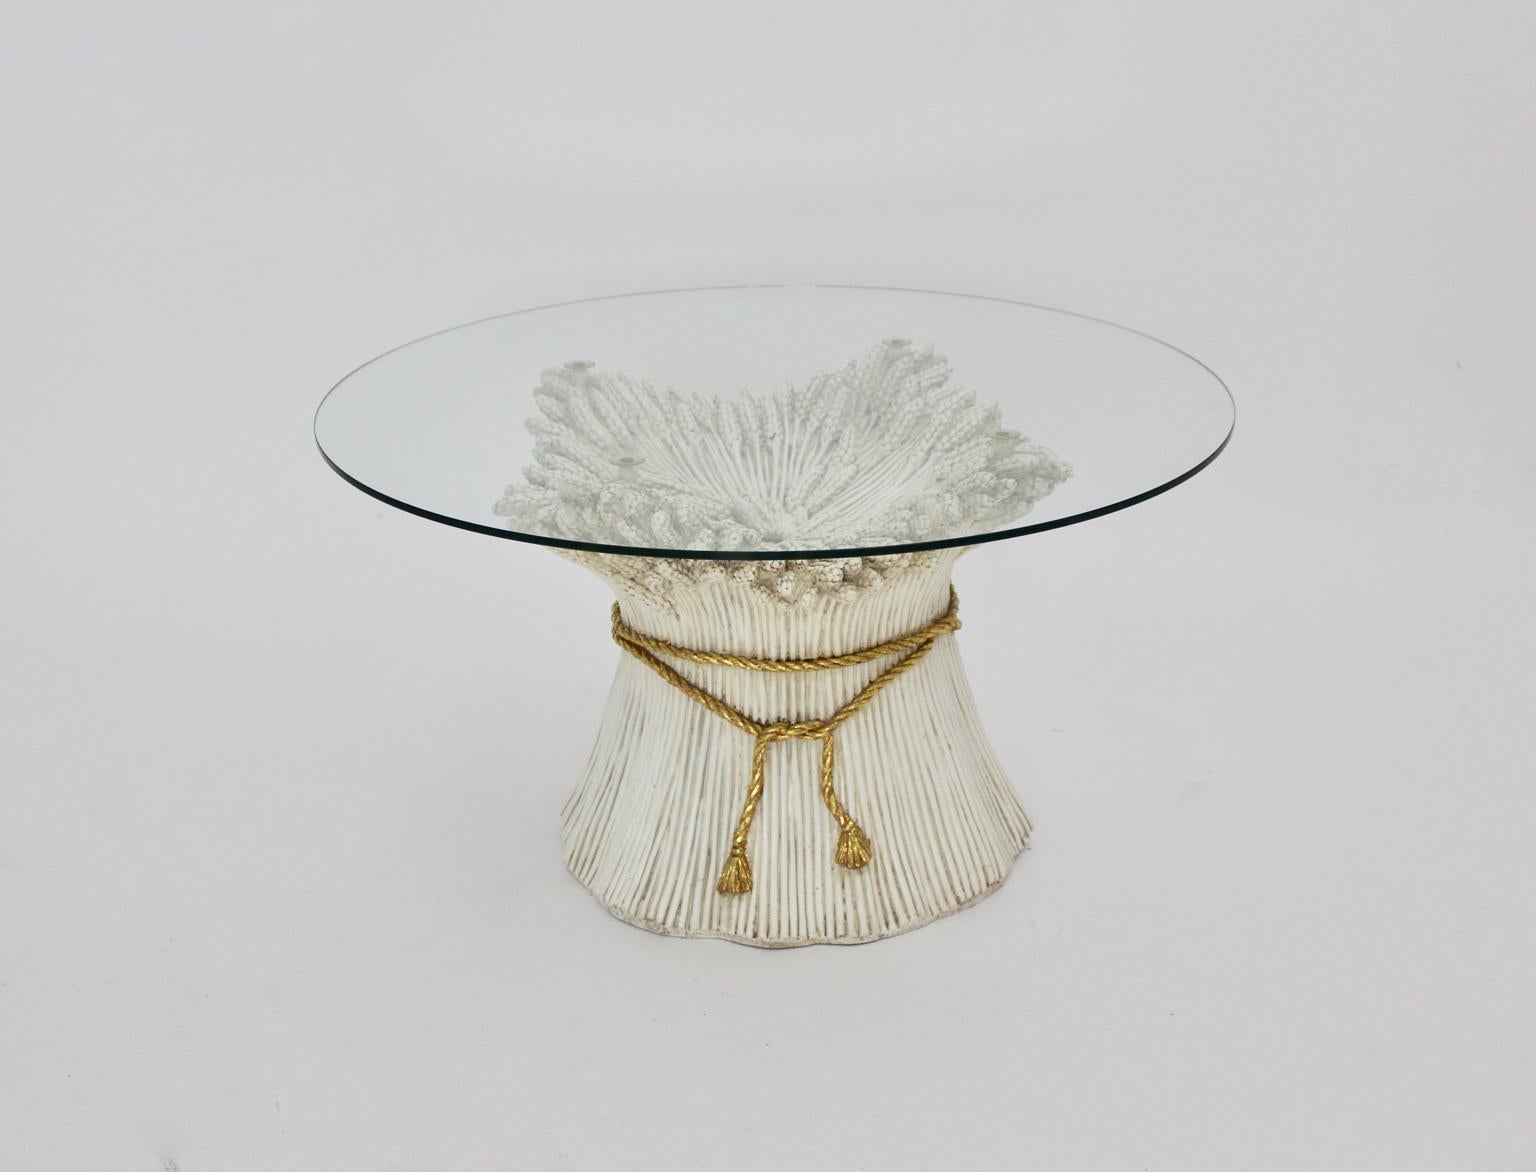 A white and gold Hollywood Regency Sheaf of Wheat coffee table, which was designed 1970s Italy.
The white and gold colored coated ceramic coffee table shows a sheaf of wheat bundled with a golden rope.
It features a clear glass top without